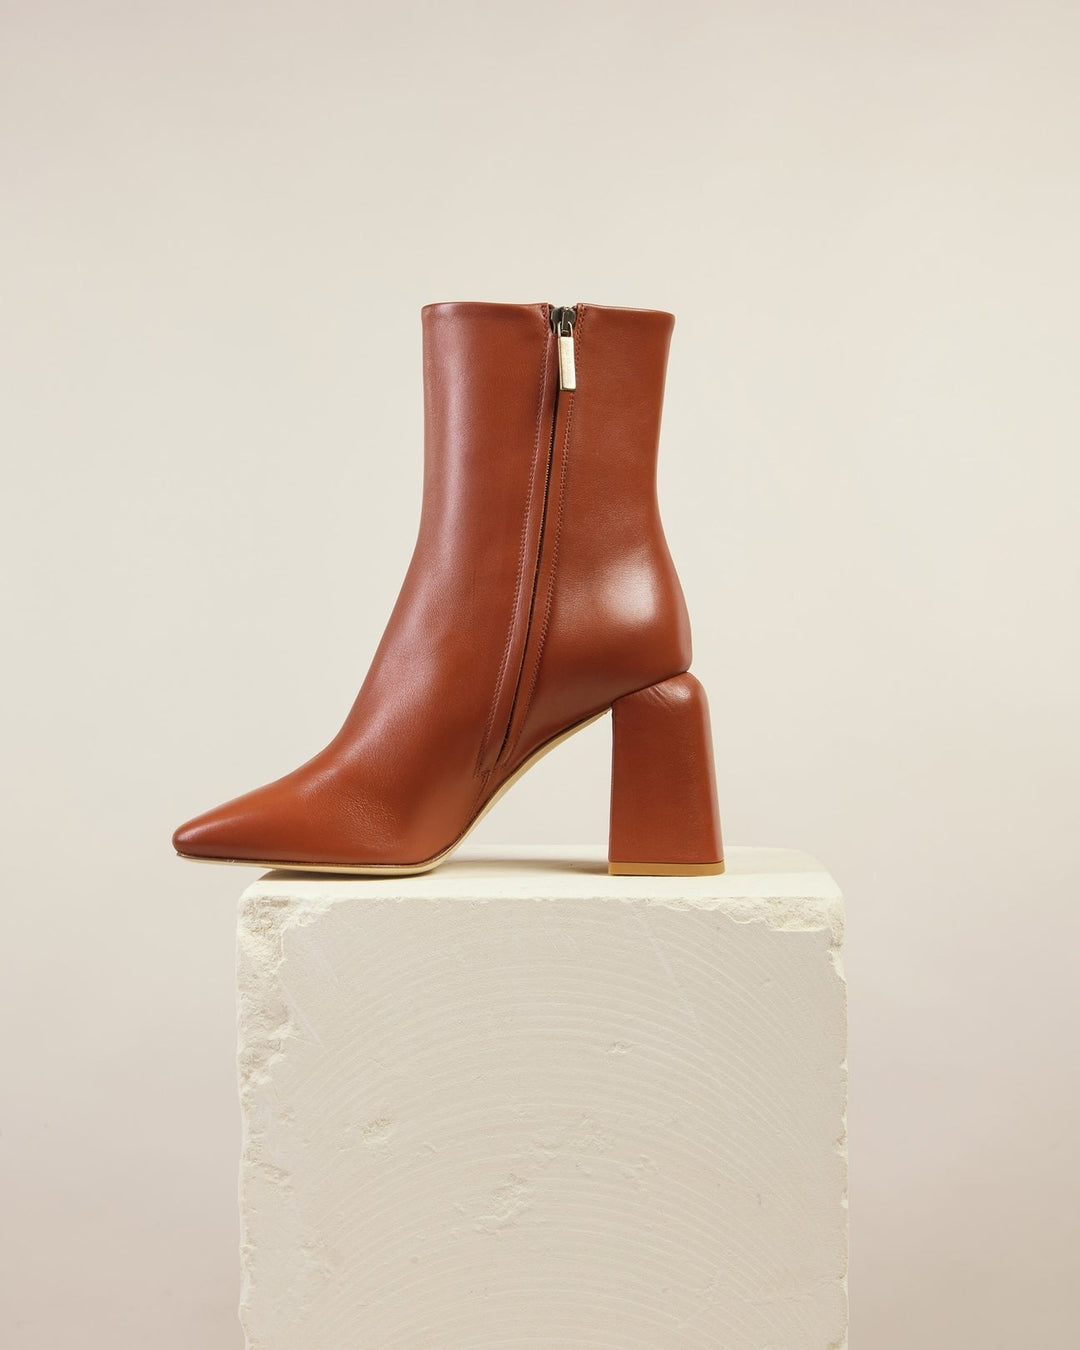 A true outfit elevator, the Imani boots are elegantly crafted with a snug, high ankle silhouette and wrapped leather heel. Restrained and refined reflecting Jane Frances’s minimalist vision, each pair is made in buttery soft leather for timeless style, whatever the occasion.